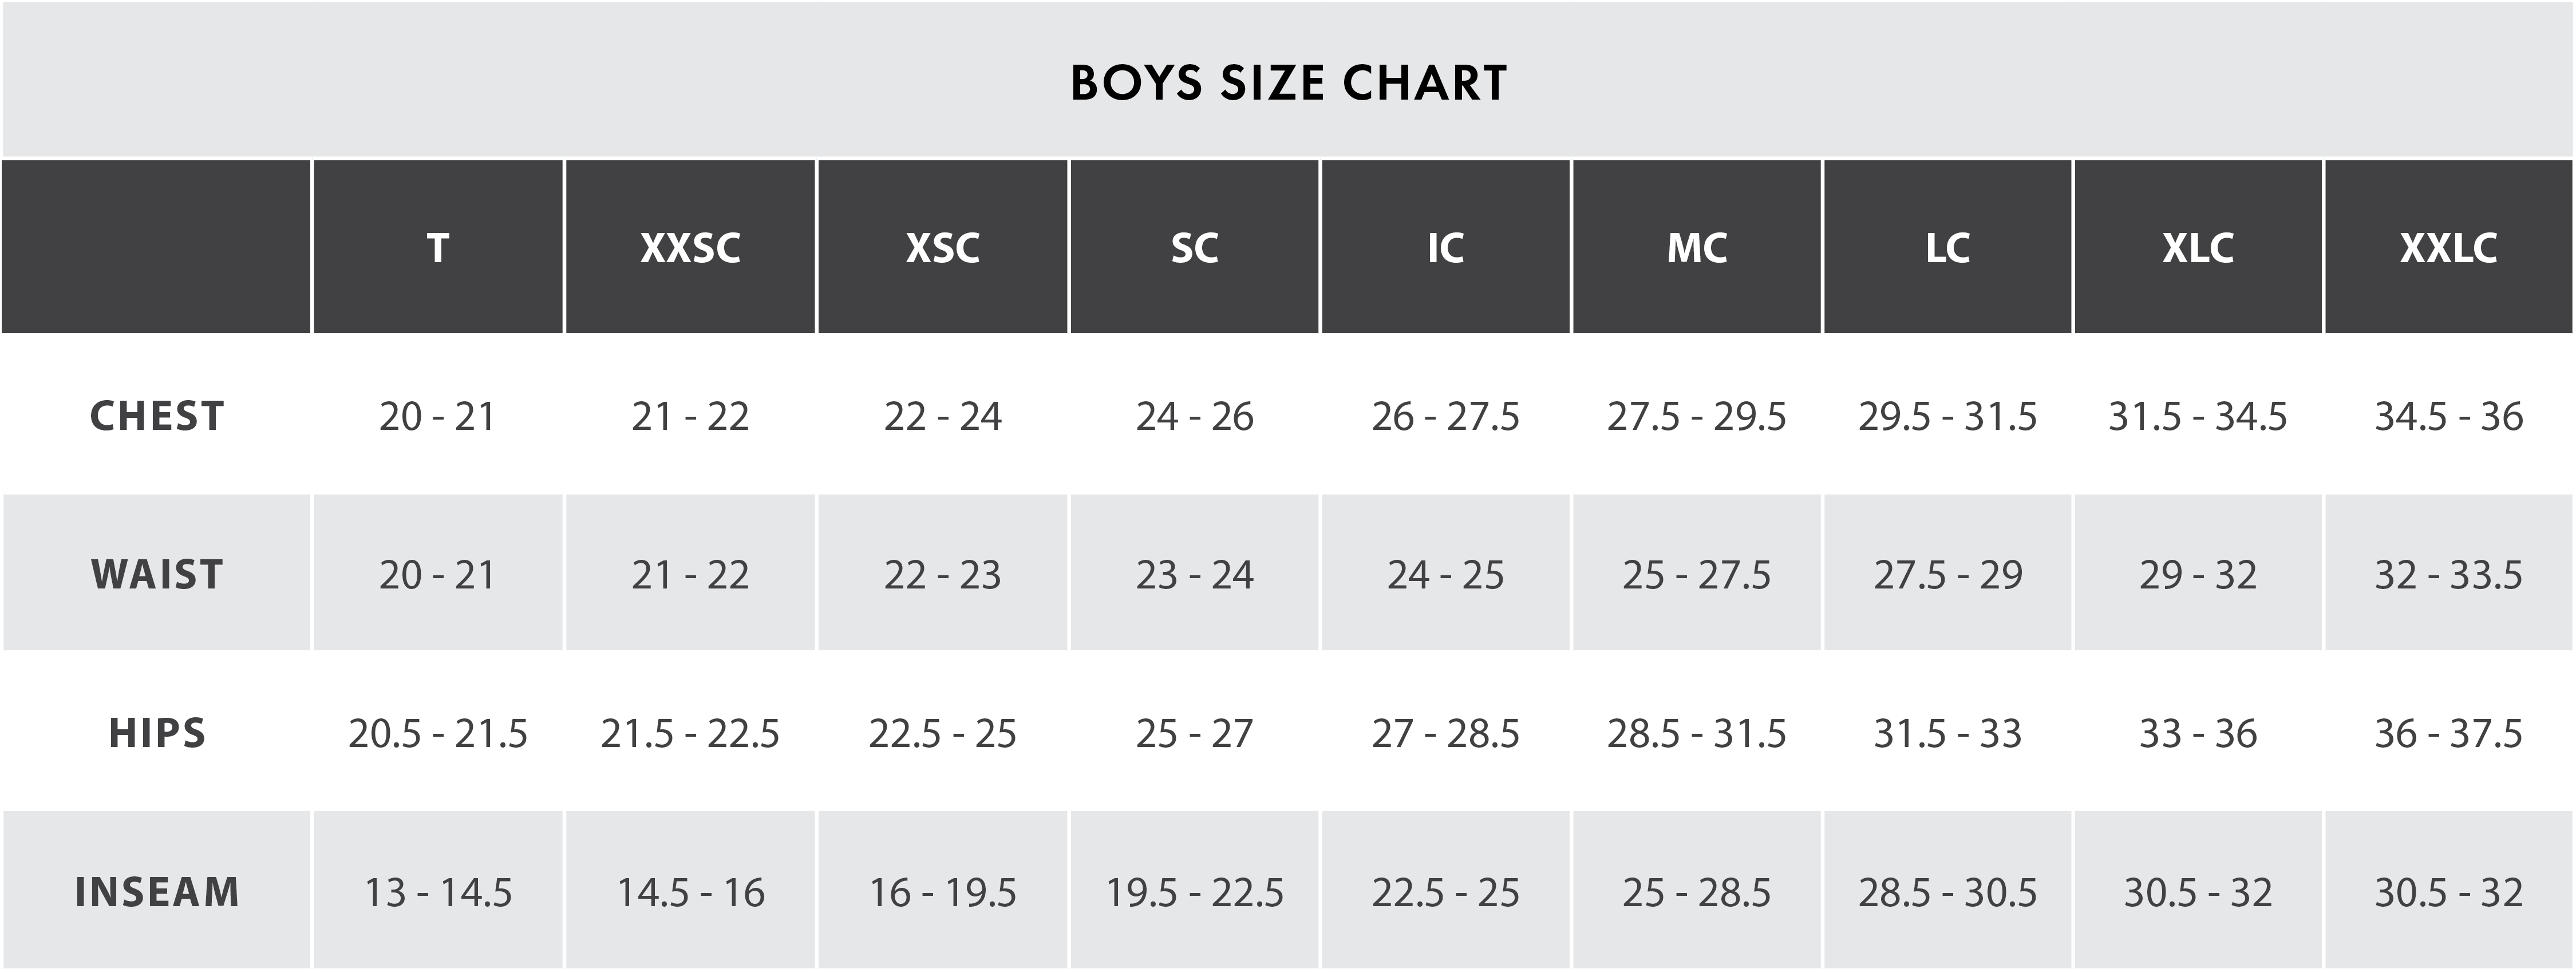 child boys size chart inches